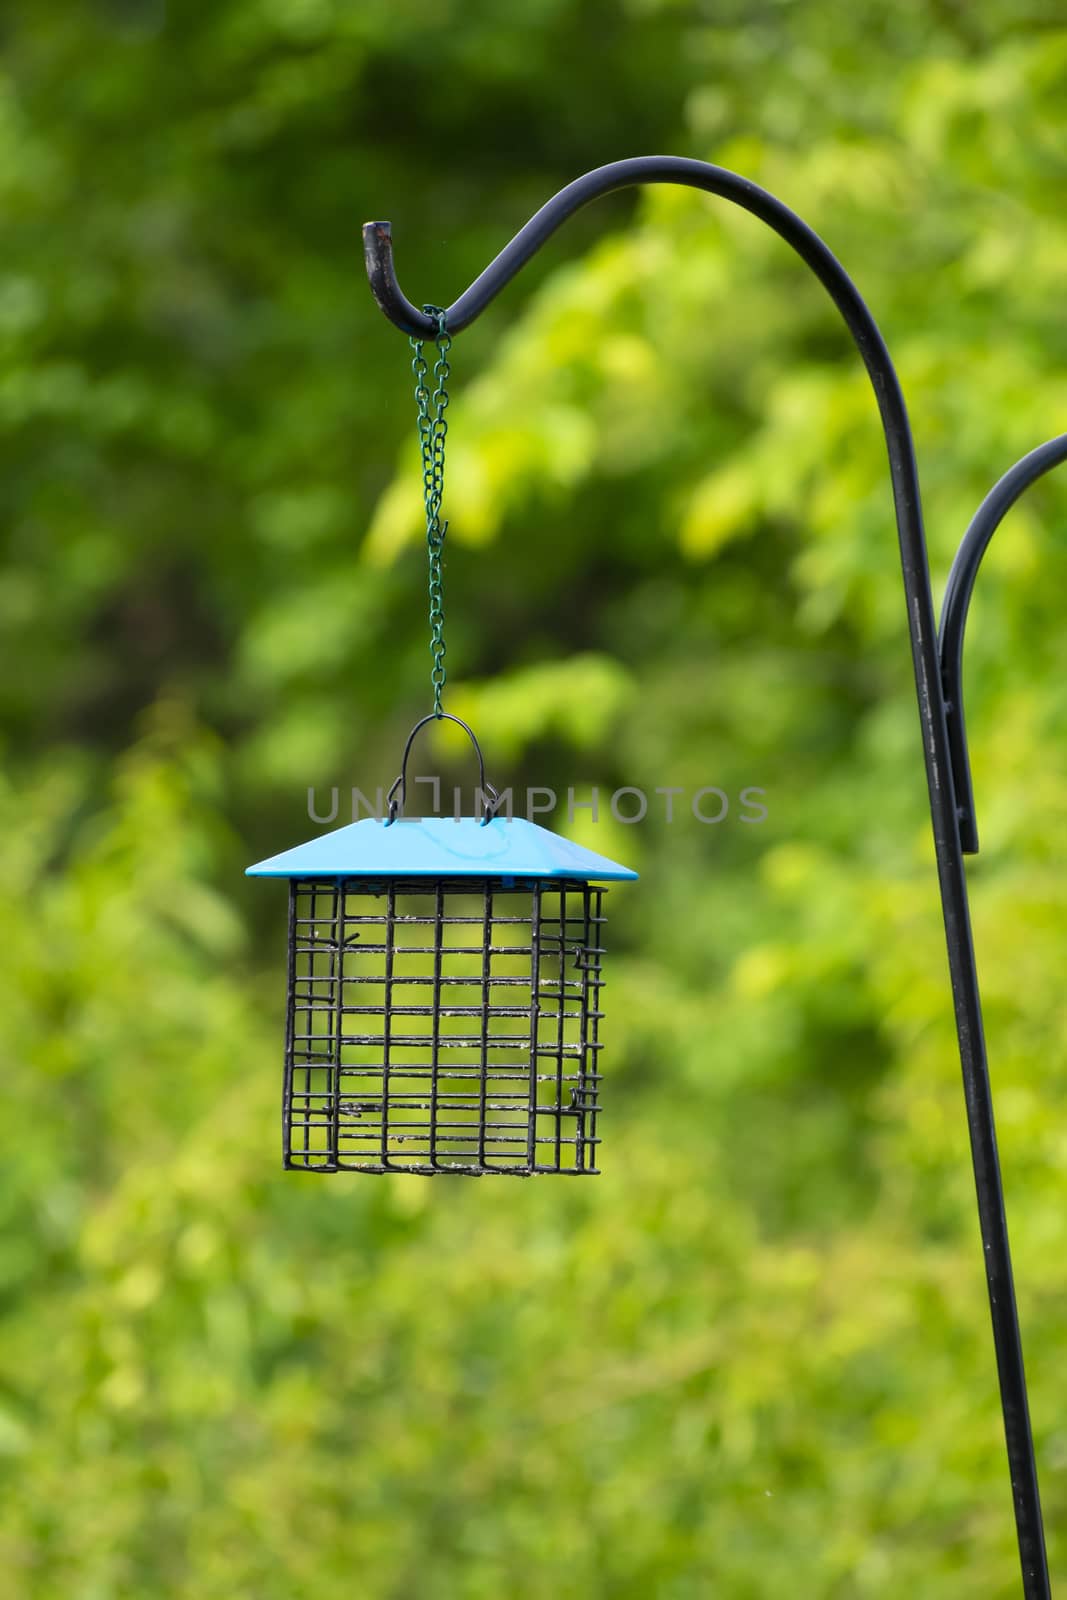 Completely Empty Bird Feeder by stockbuster1